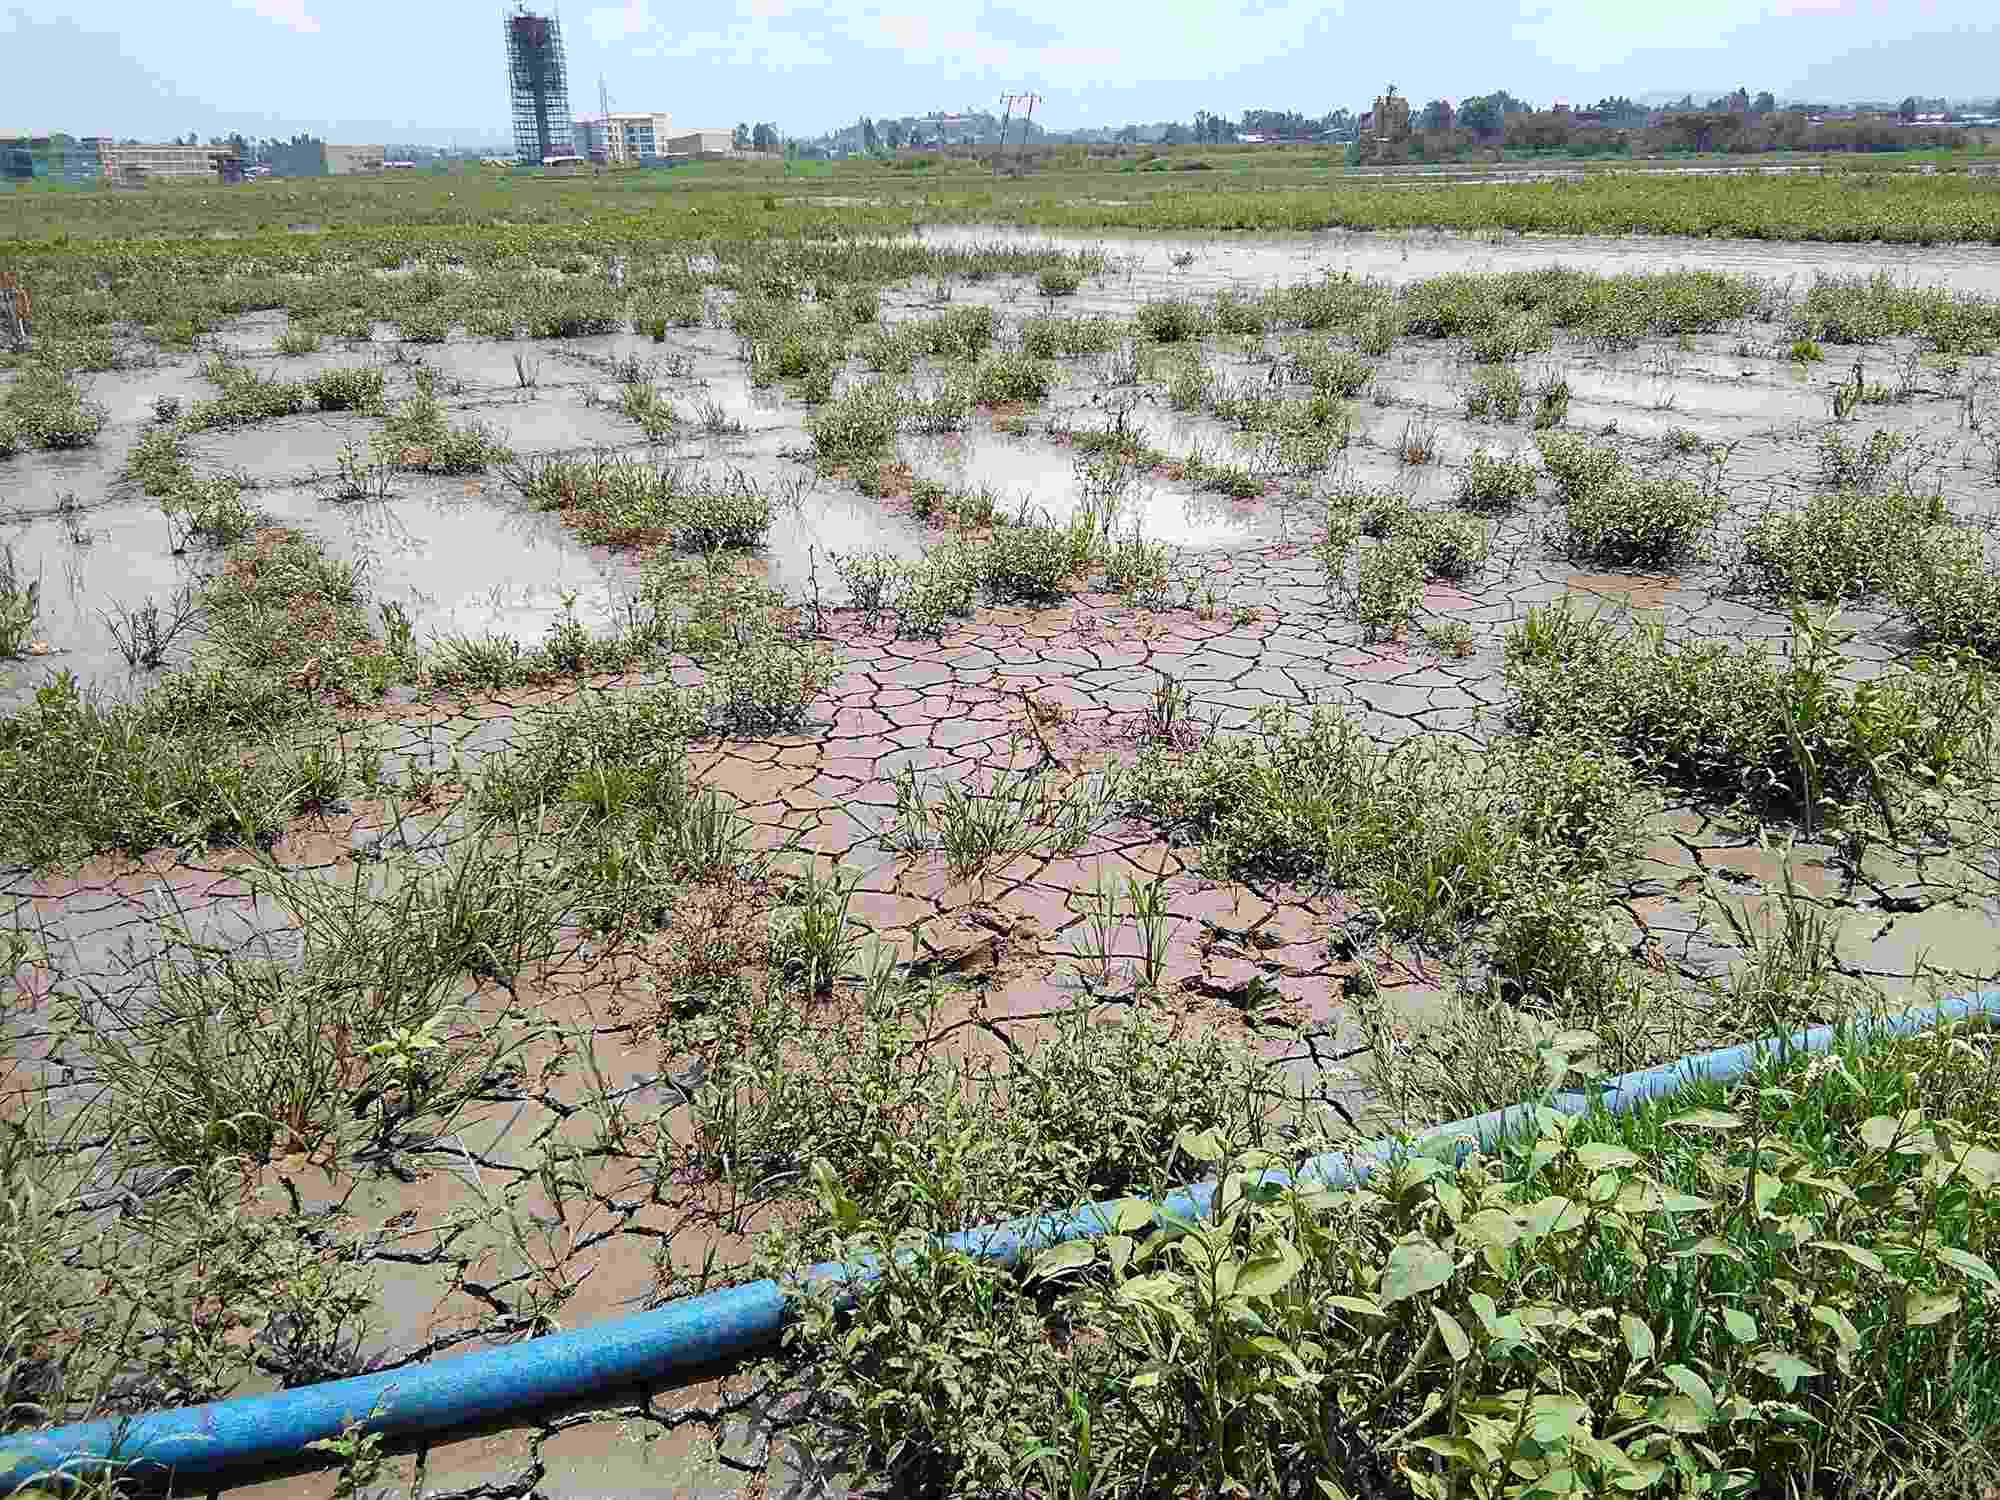 Flood waters saturate a planted crop field, leaving crops covered with silt as the water beings to recede in parts.